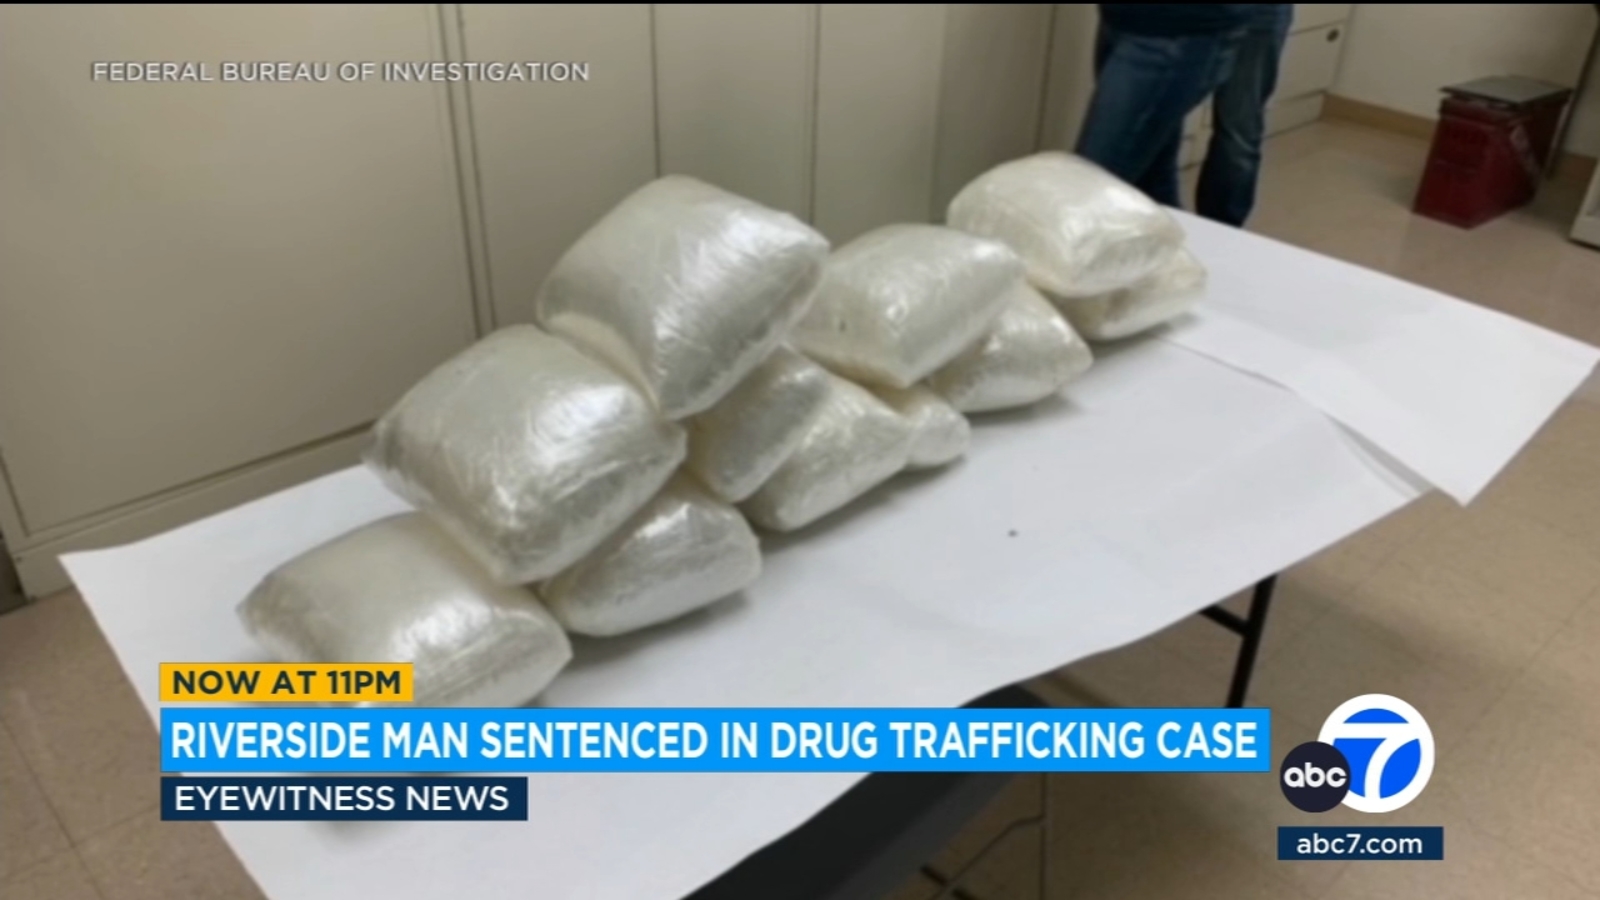 Riverside man sentenced to 21 years for smuggling pounds of meth from Mexico into IE